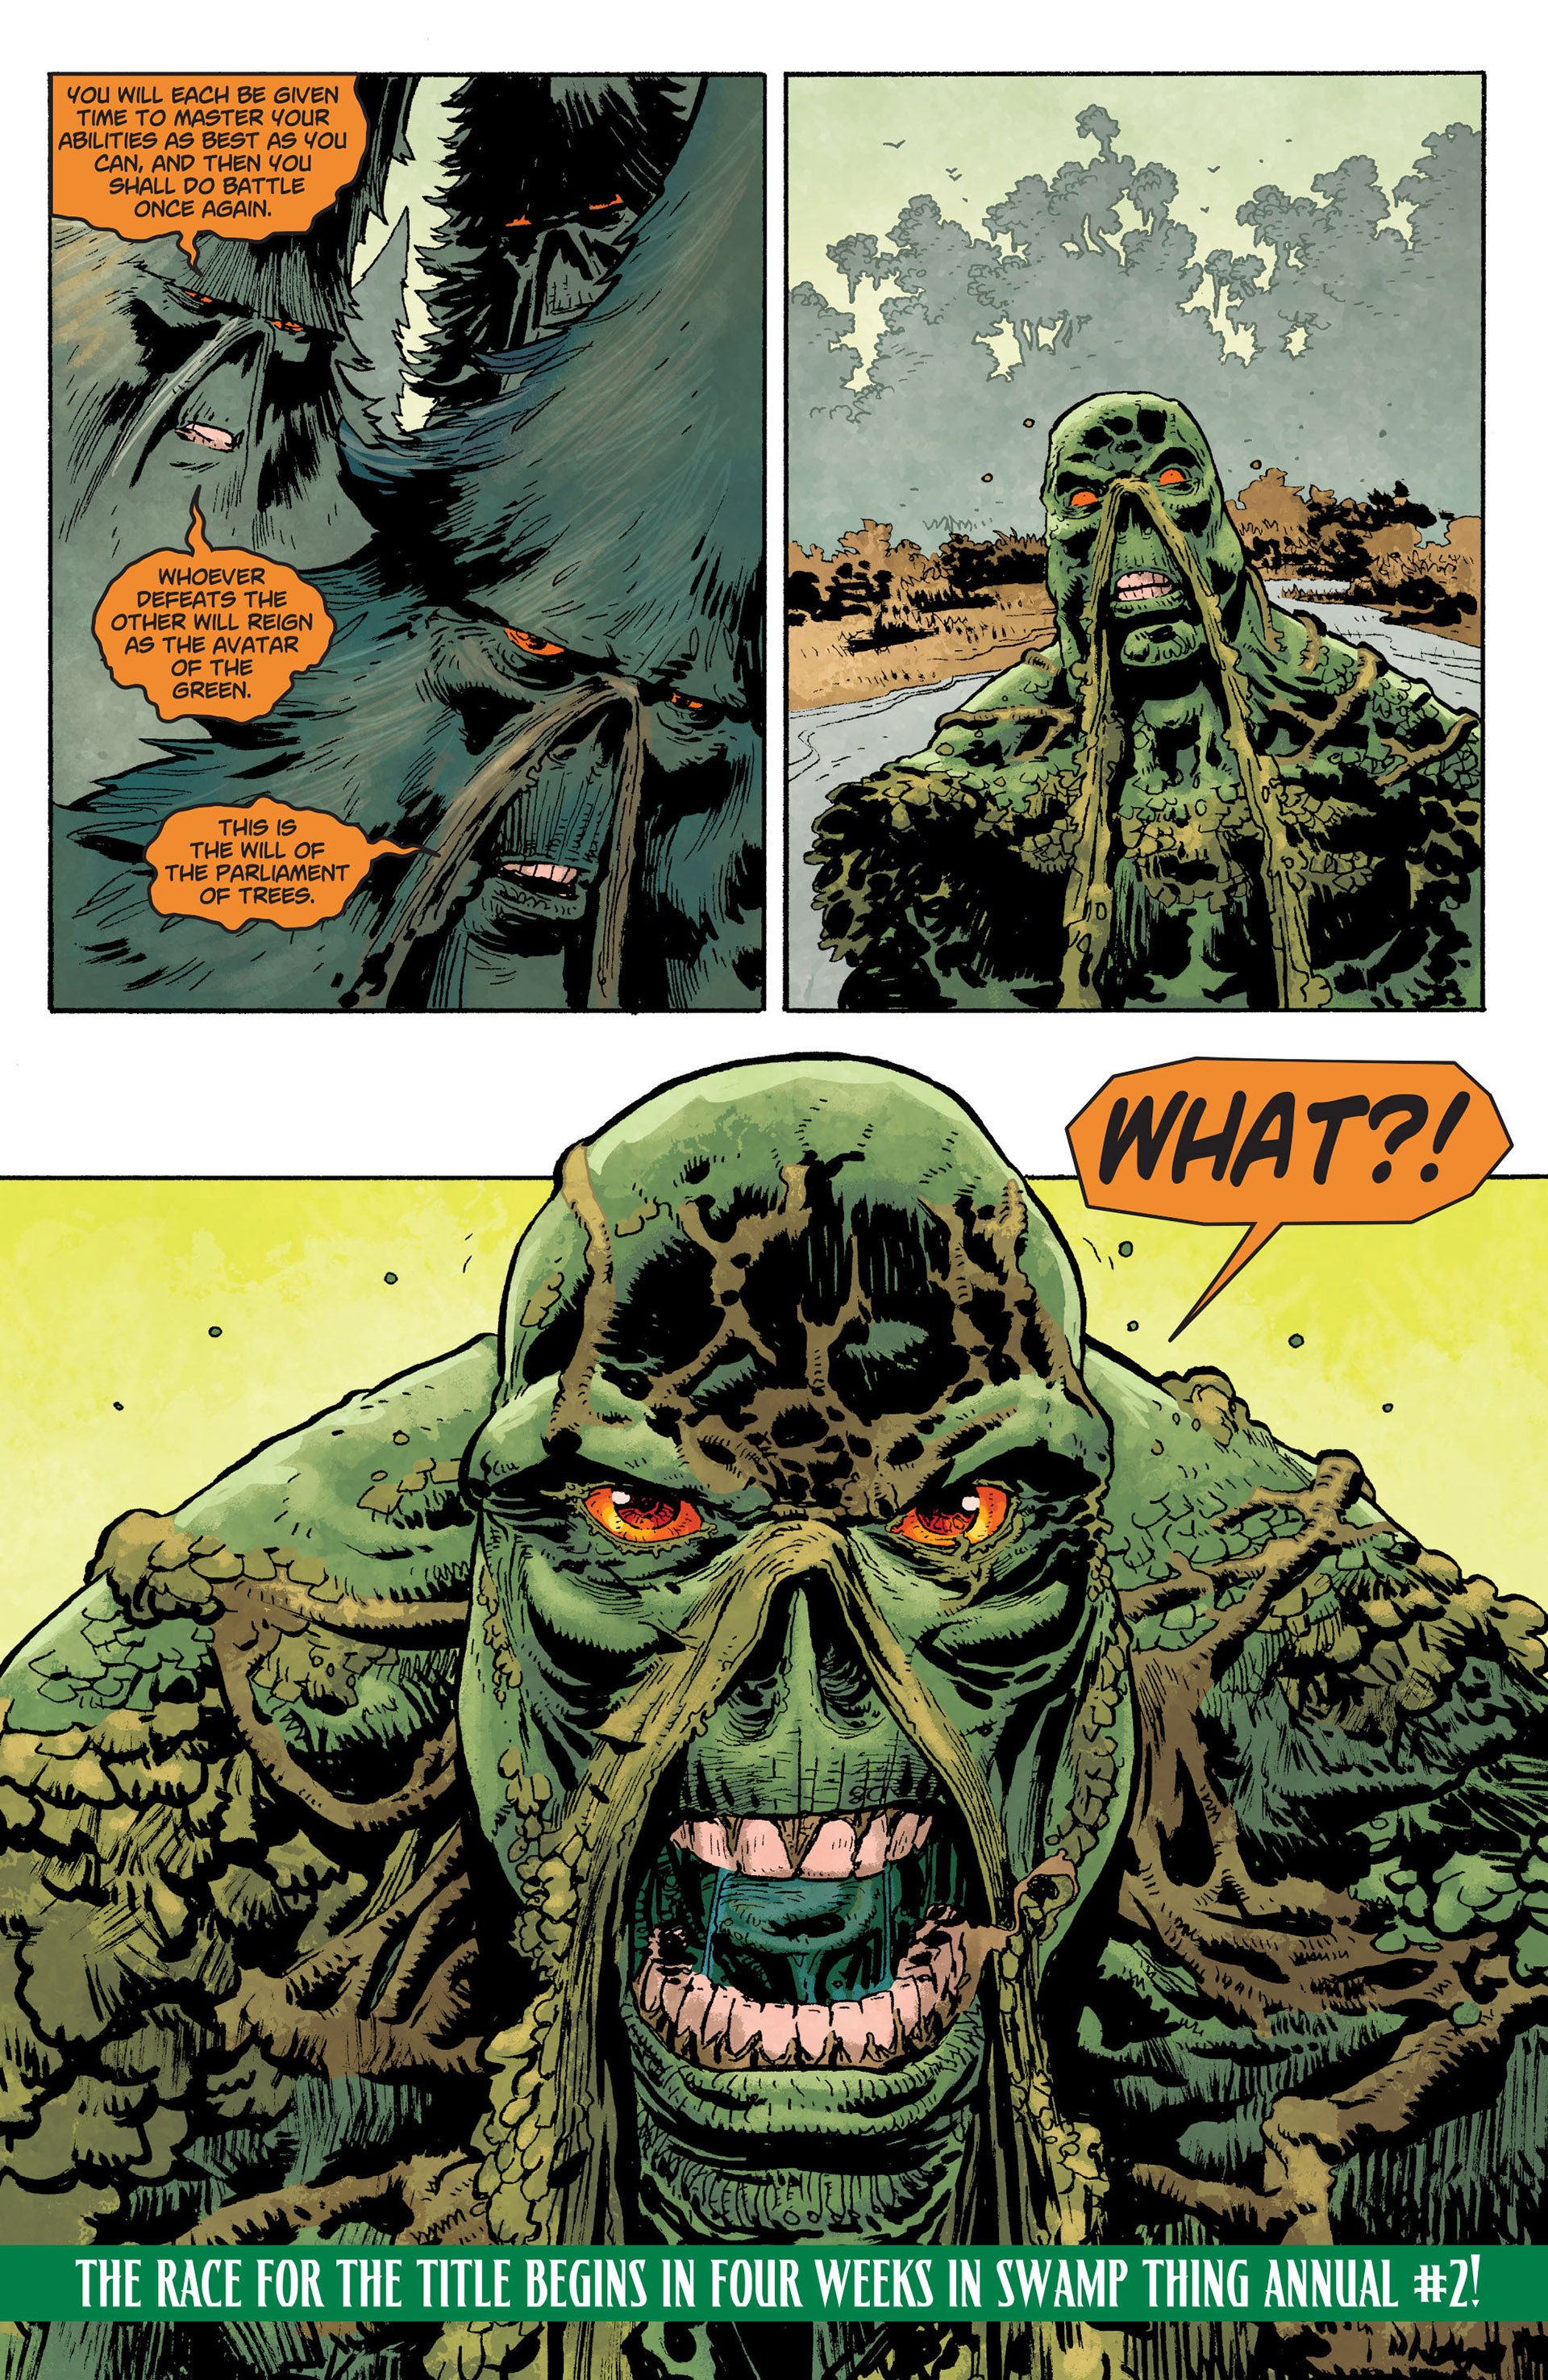 Tip: Click on the Swamp Thing (2011) 24 comic image to go to the next page....